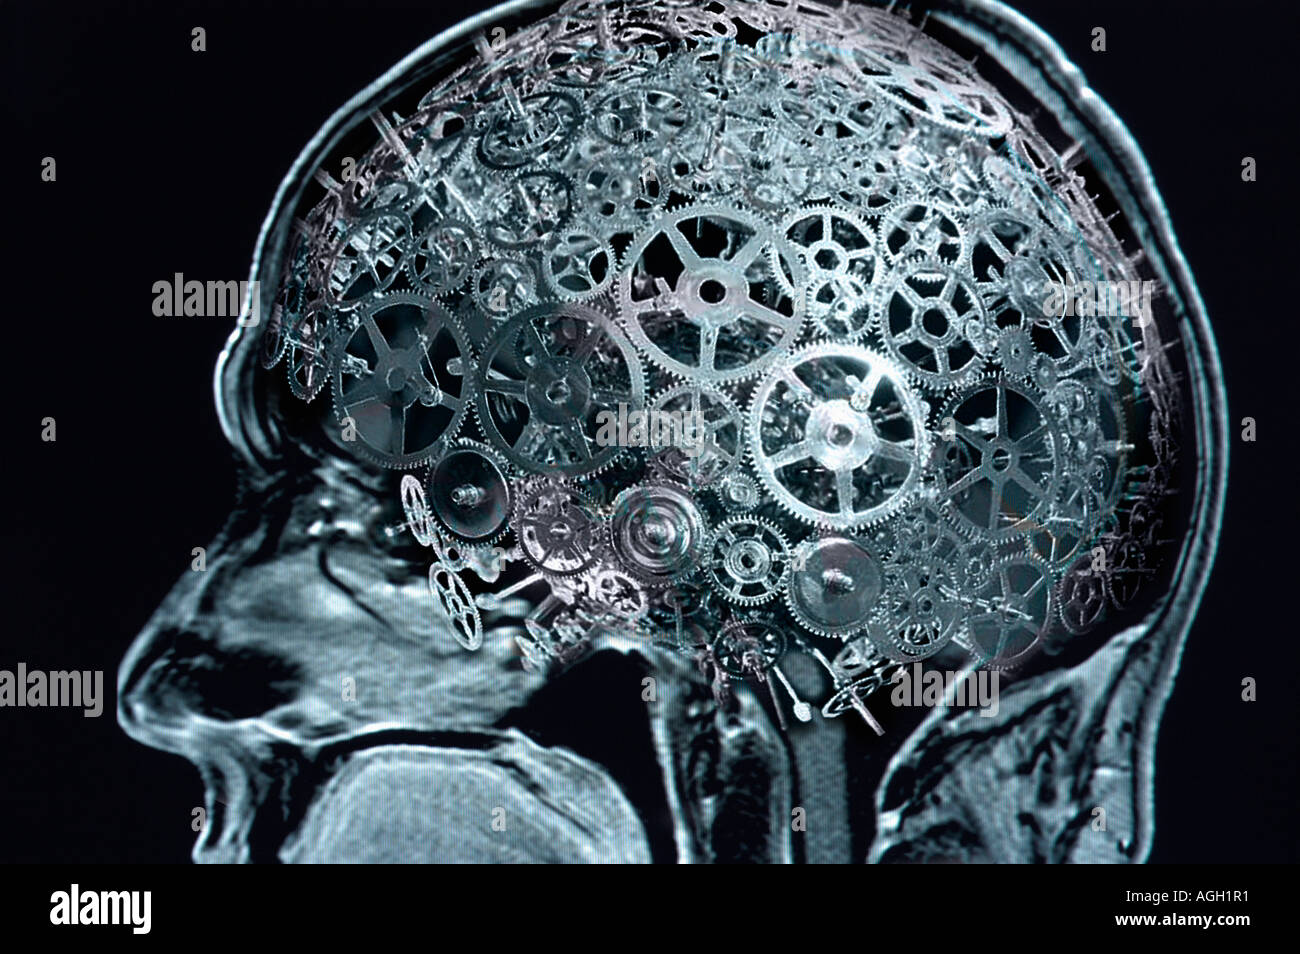 symbolic image of the human brain as a complex machinery Stock Photo